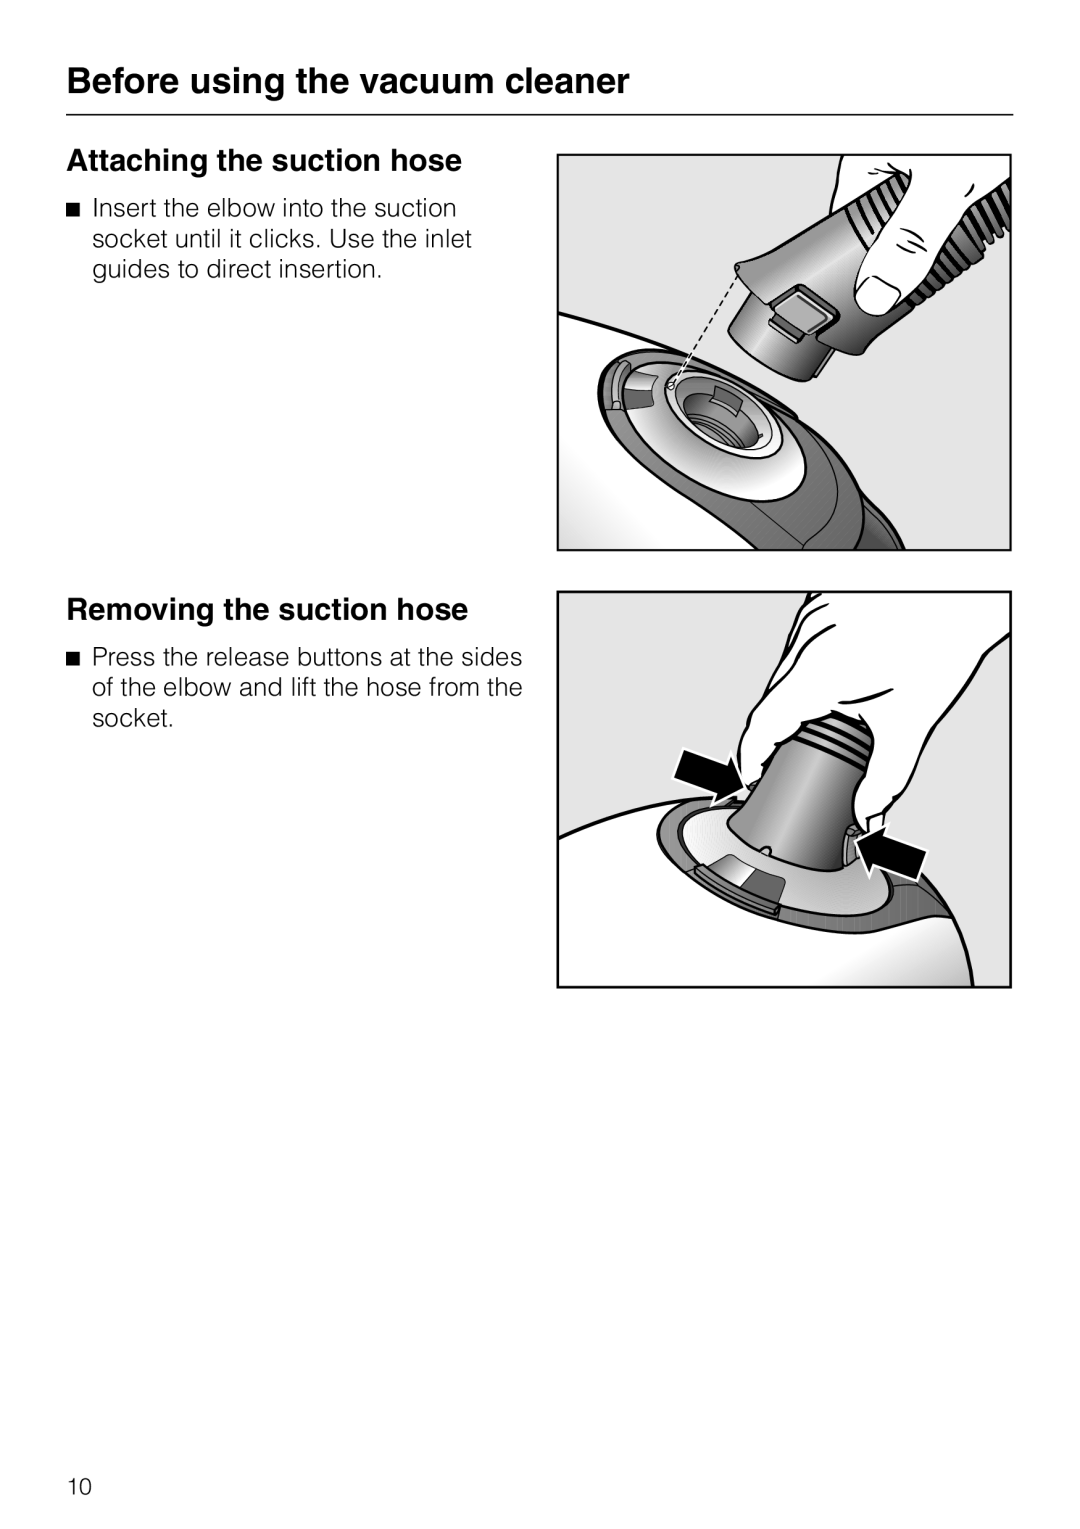 Miele S 5000 operating instructions Before using the vacuum cleaner, Attaching the suction hose, Removing the suction hose 